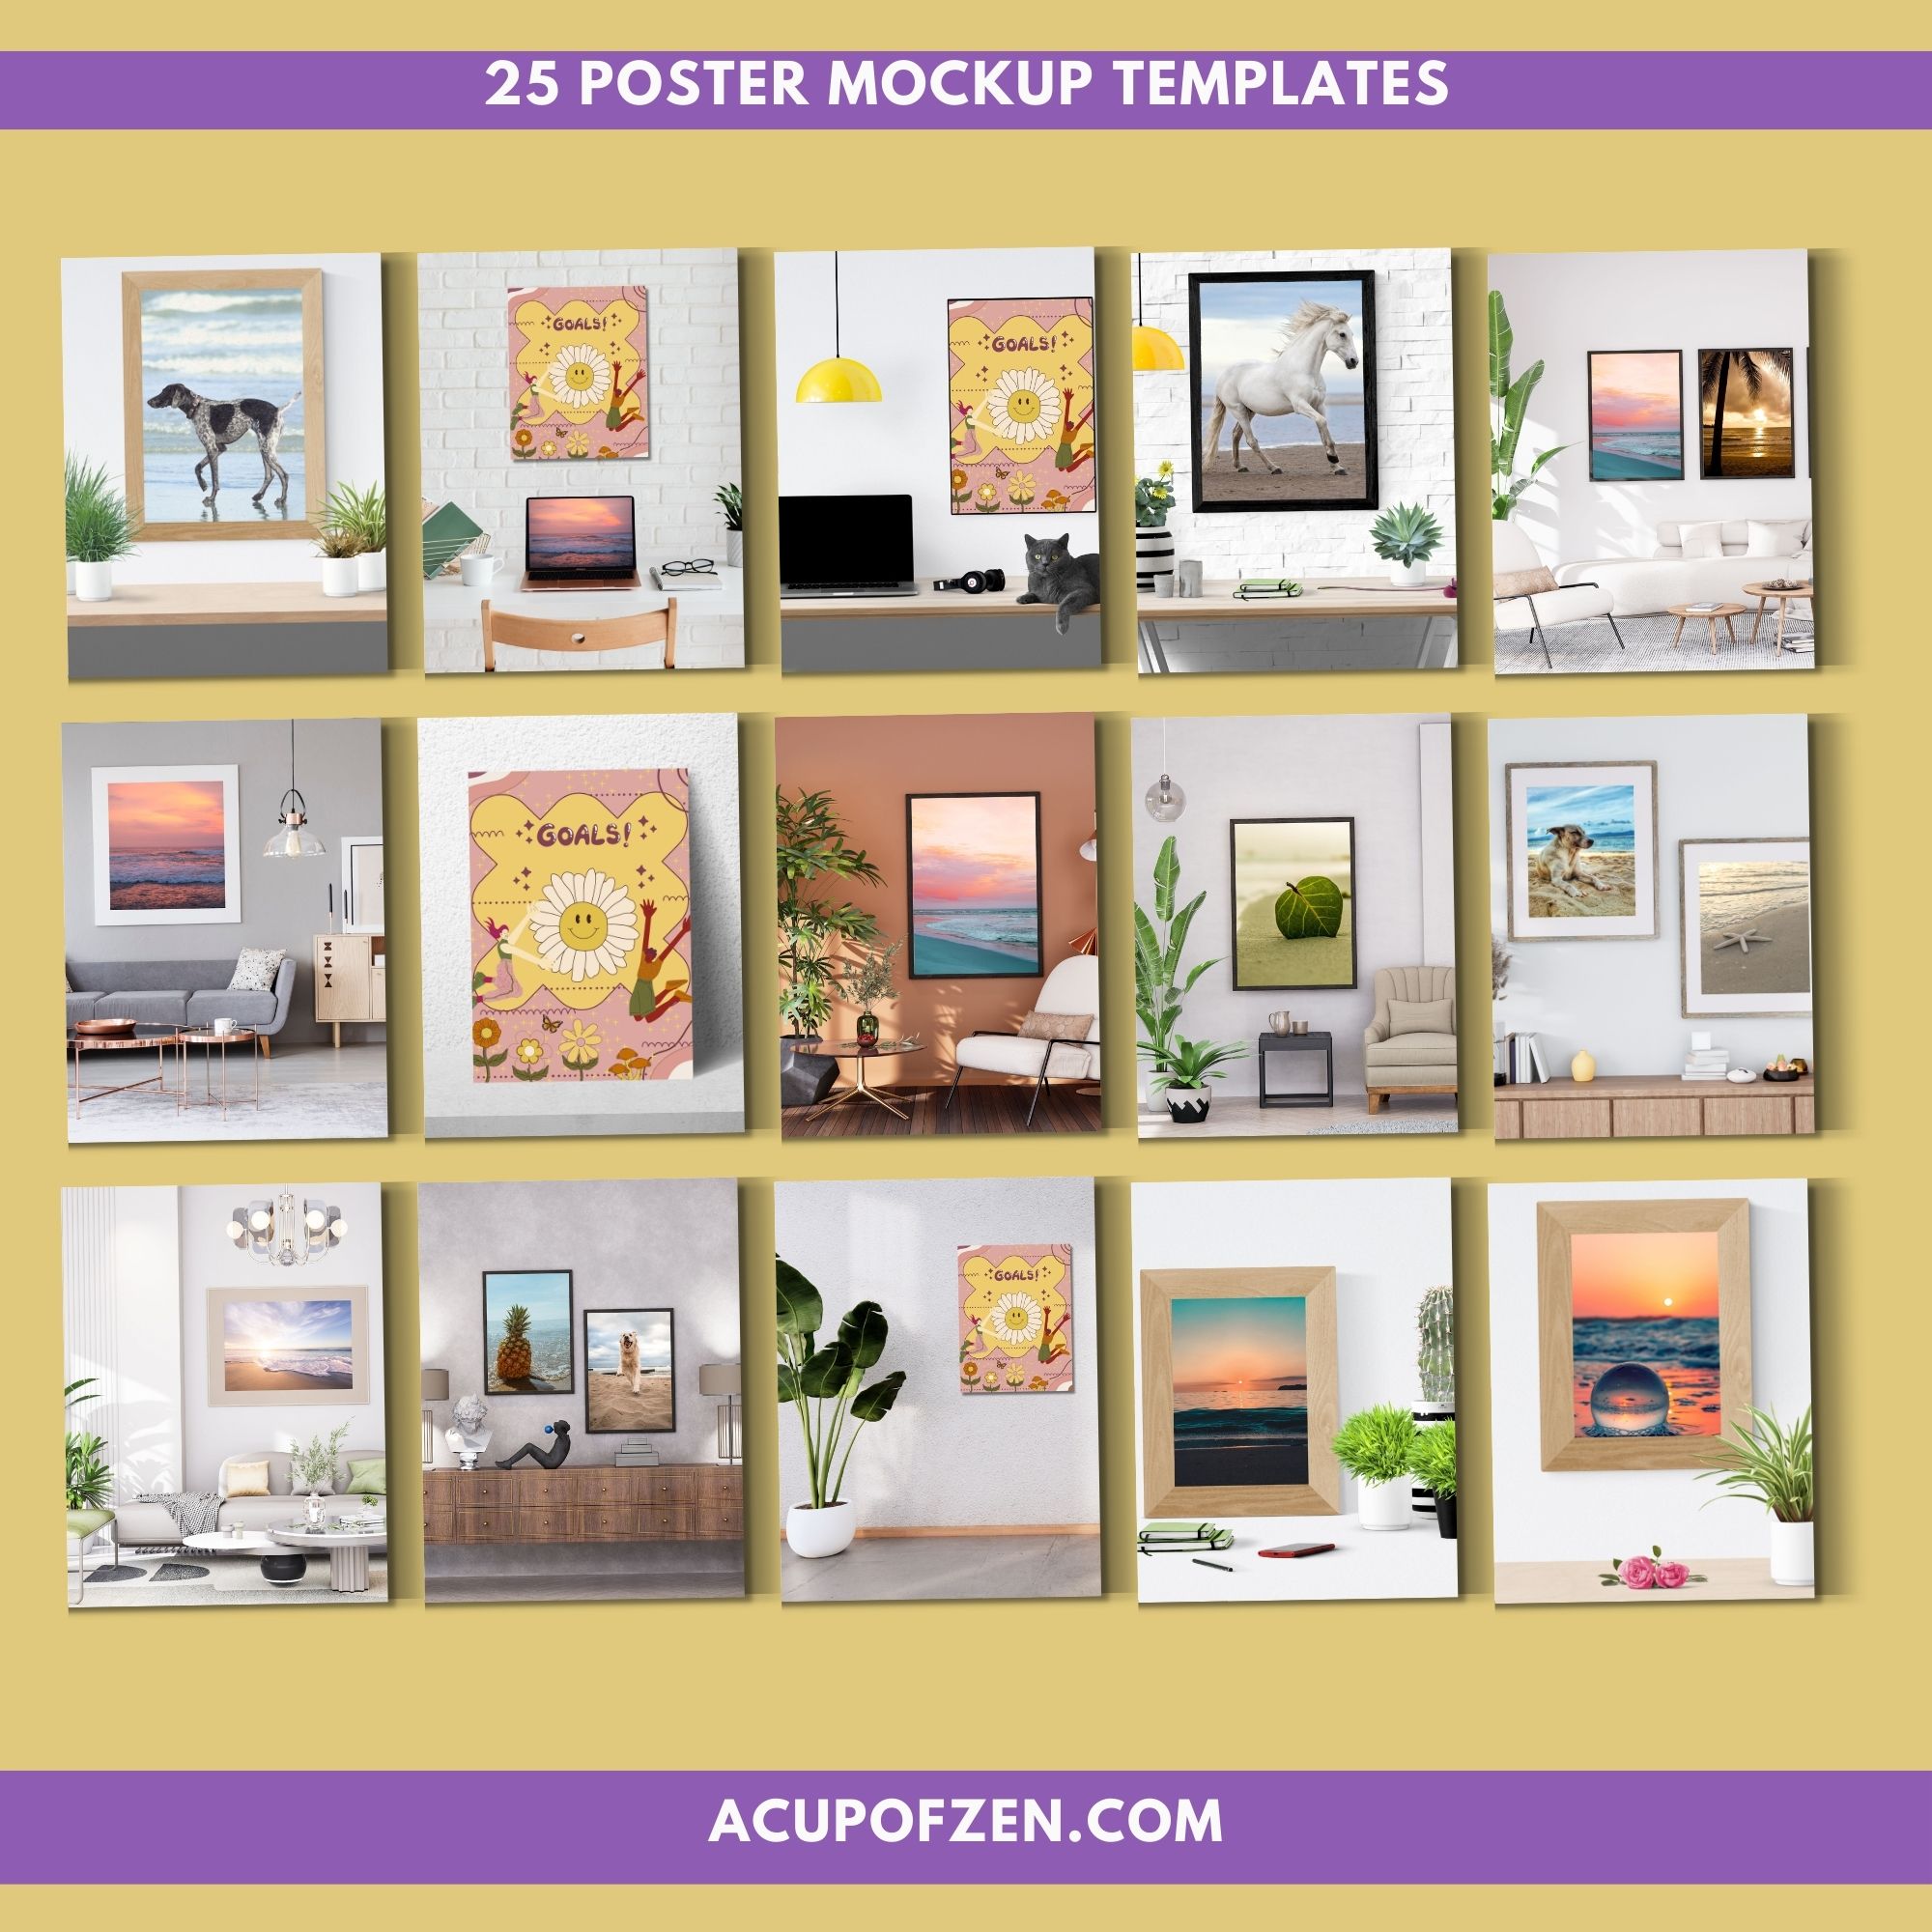 Poster Mockup Templates in Canva